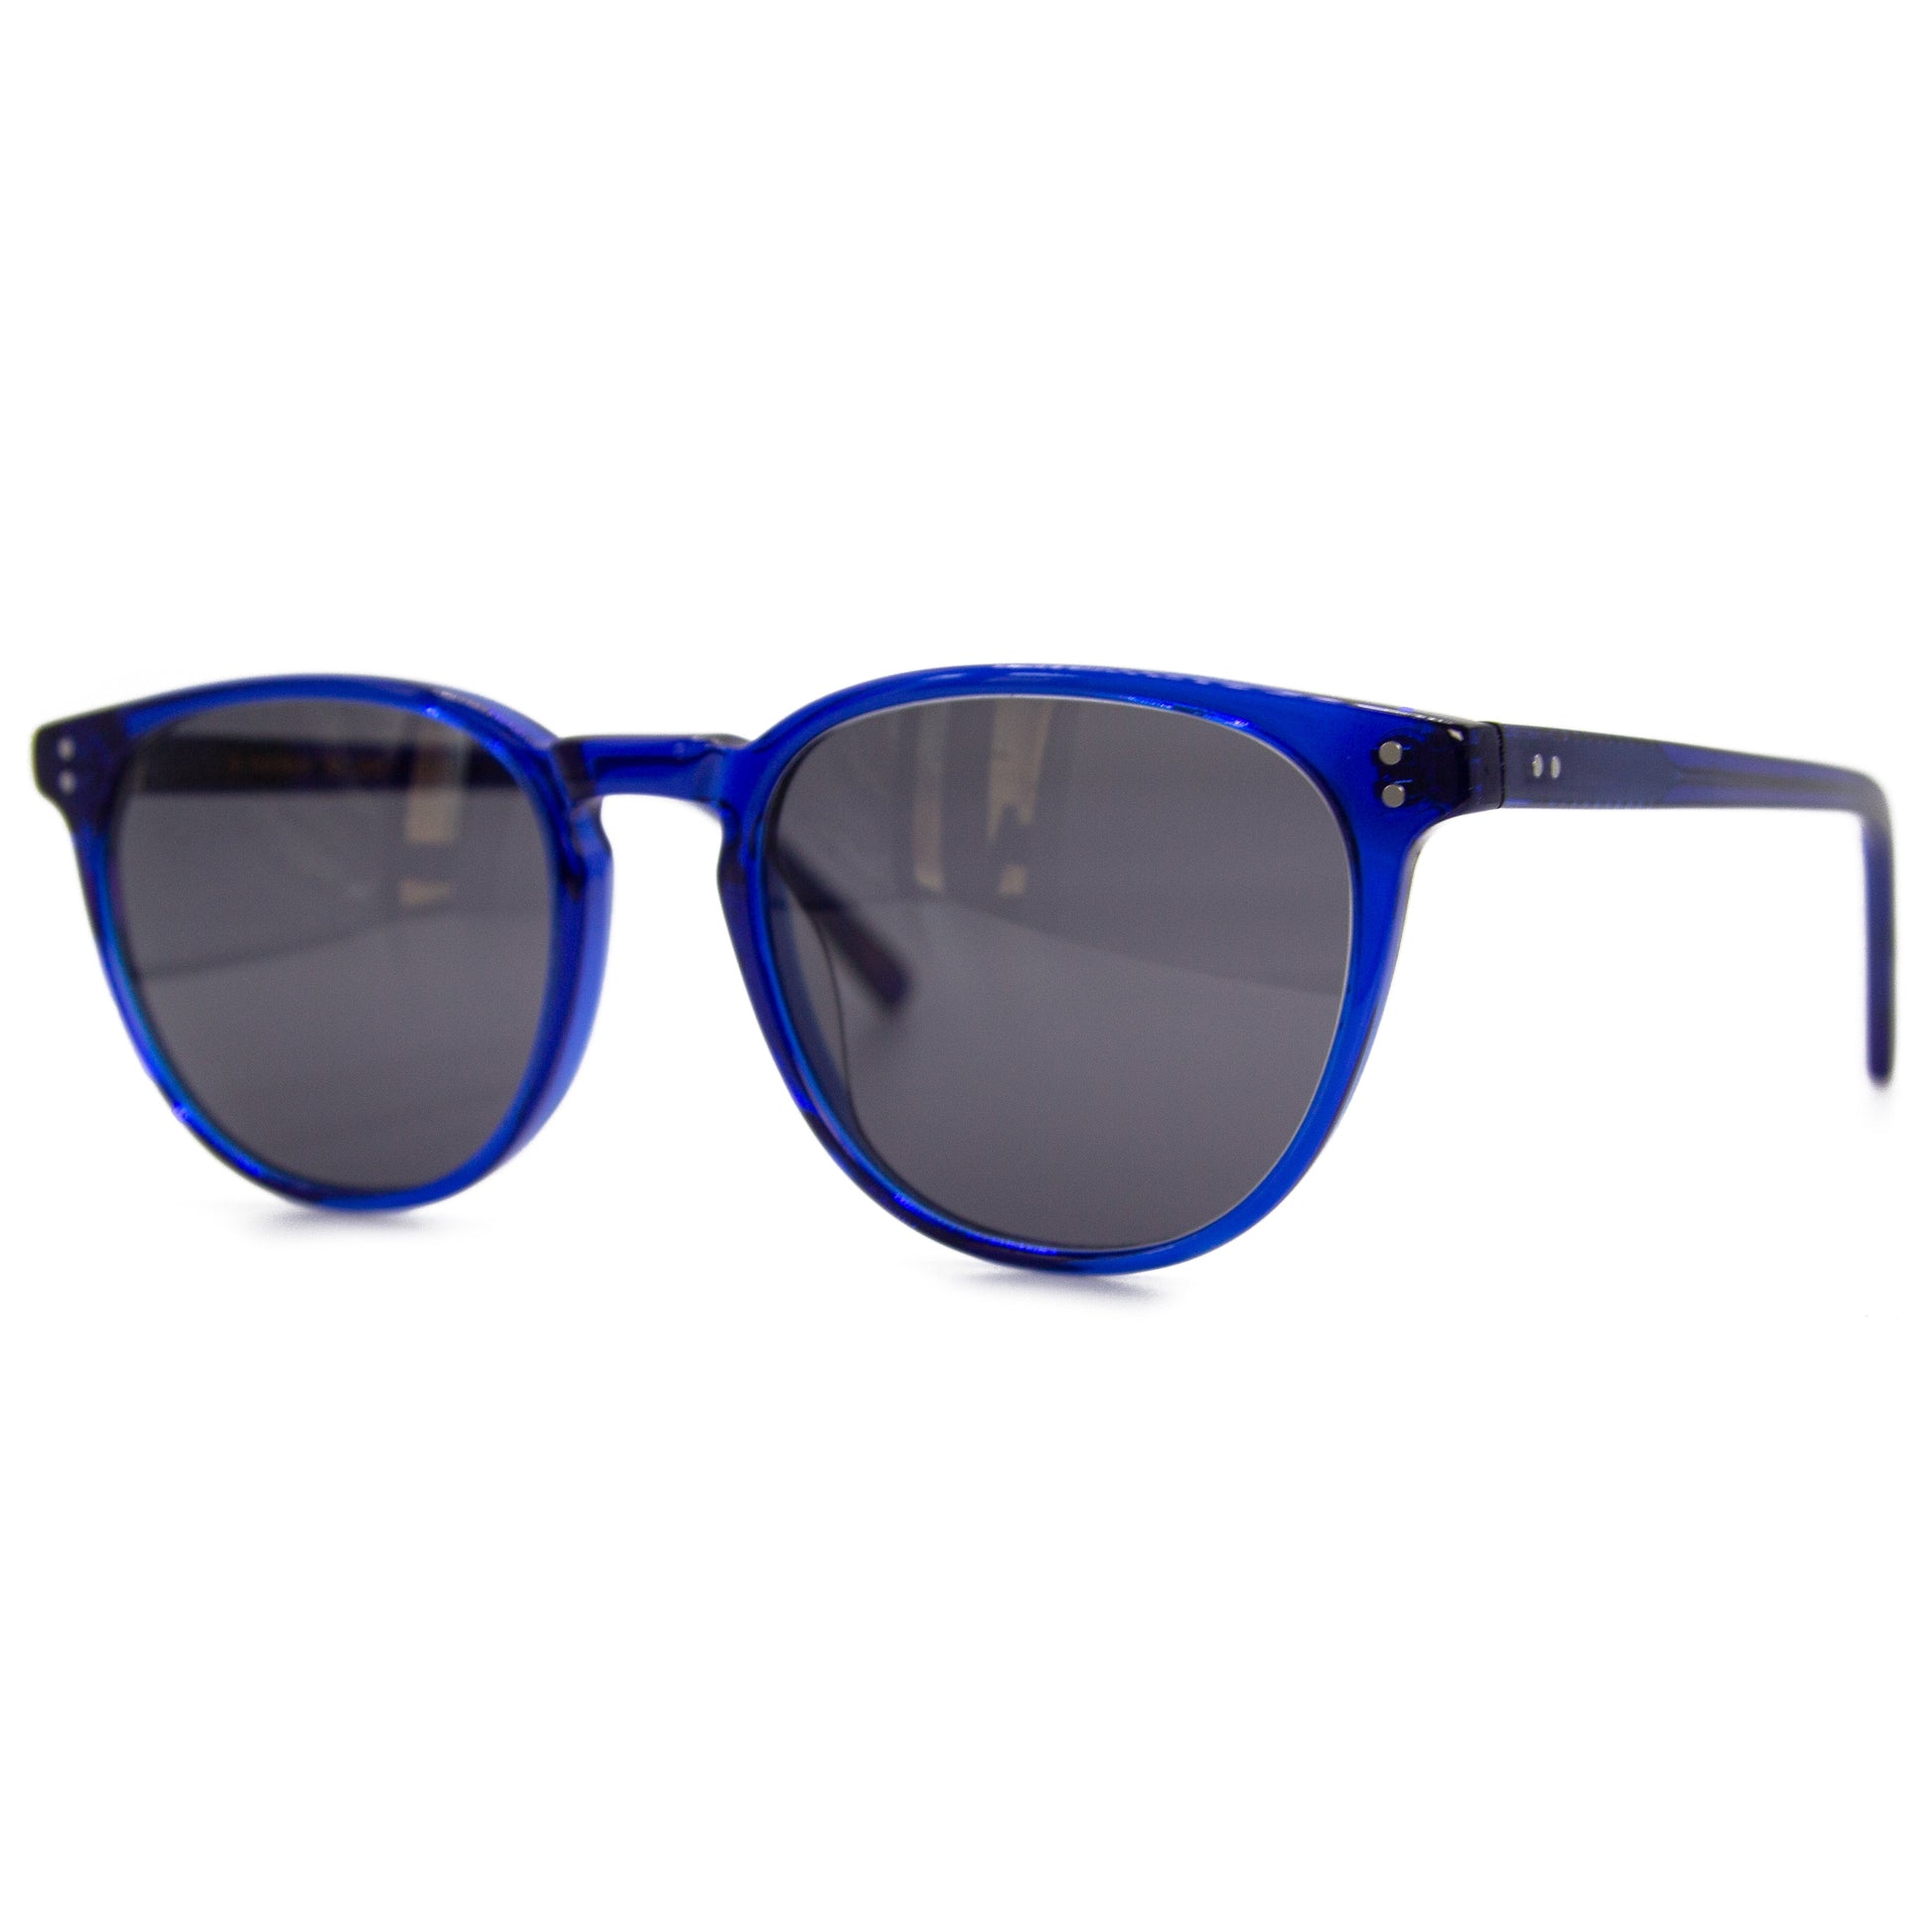 3 brothers - Ant - Navy - Prescription Sunglasses - Side